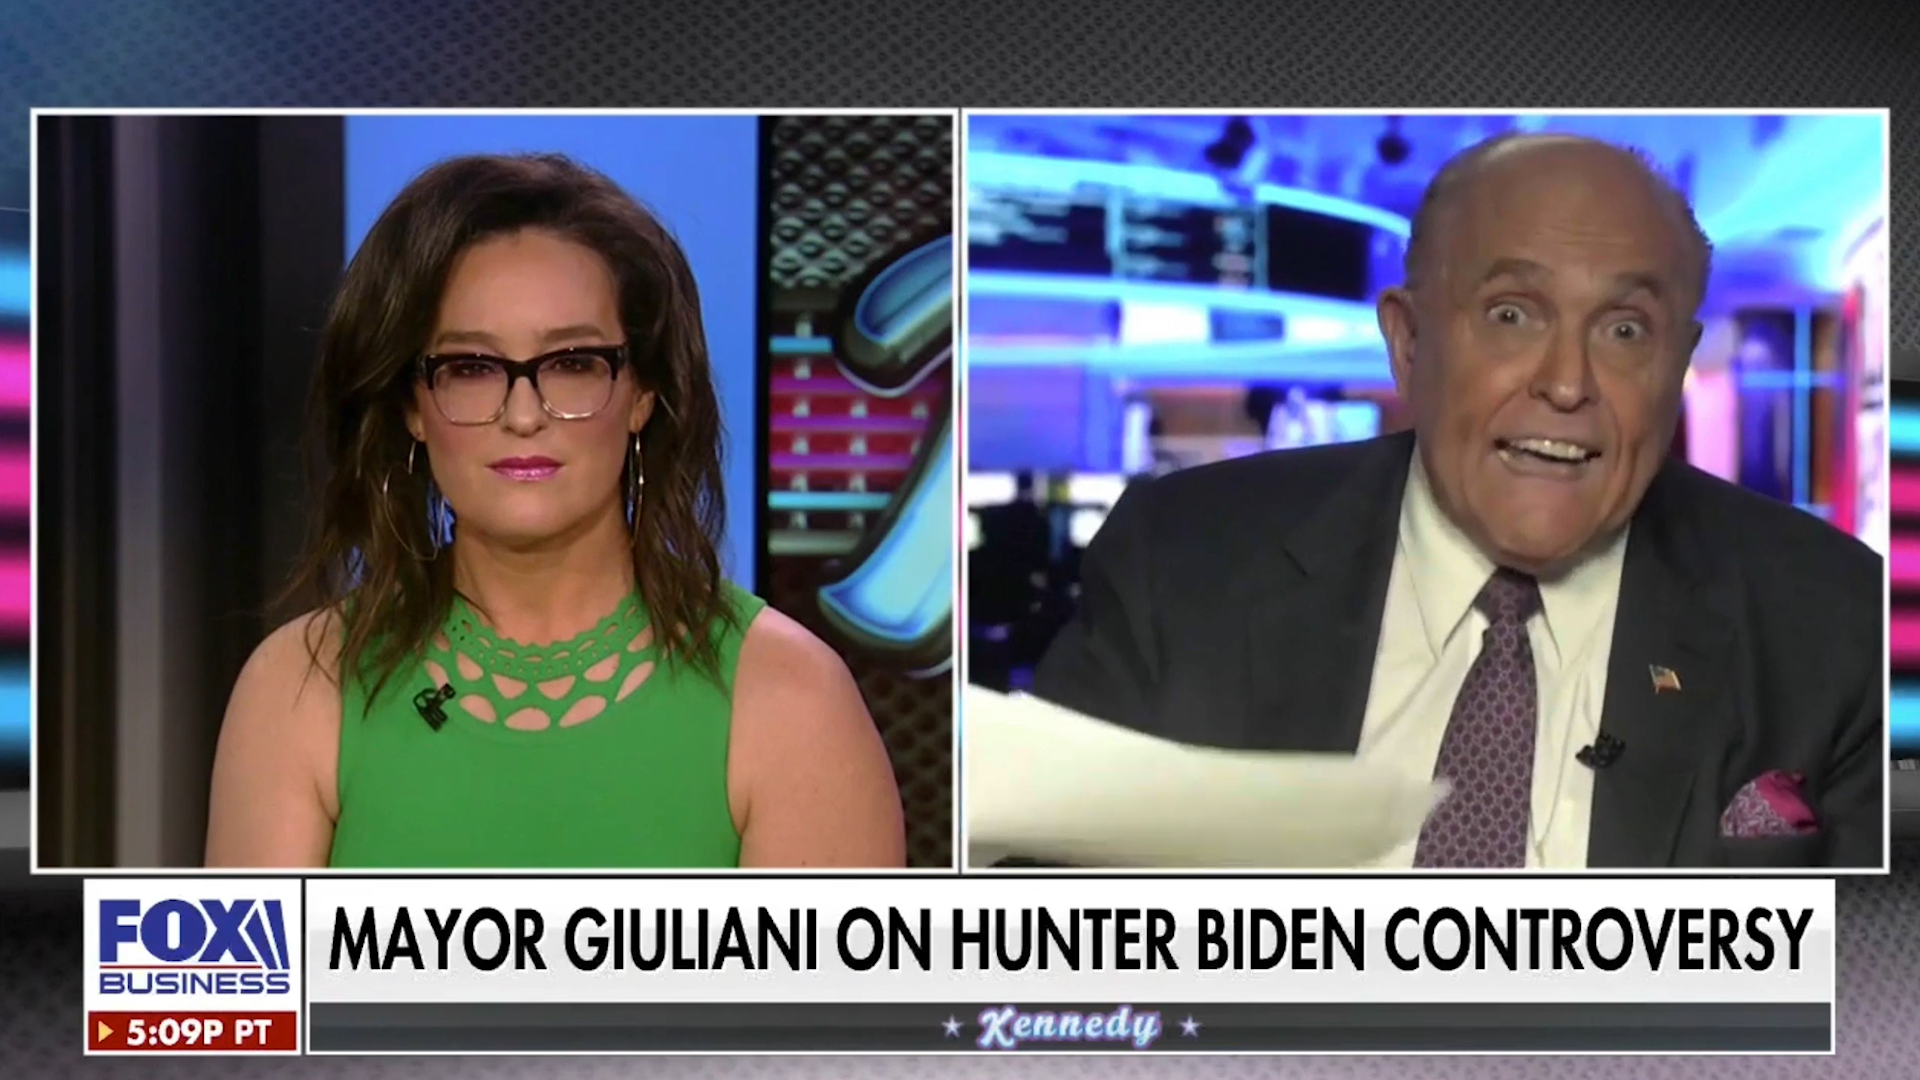 Giuliani gets irate after Fox News's Kennedy questions his Hunter Biden allegations: 'You better apologize!'